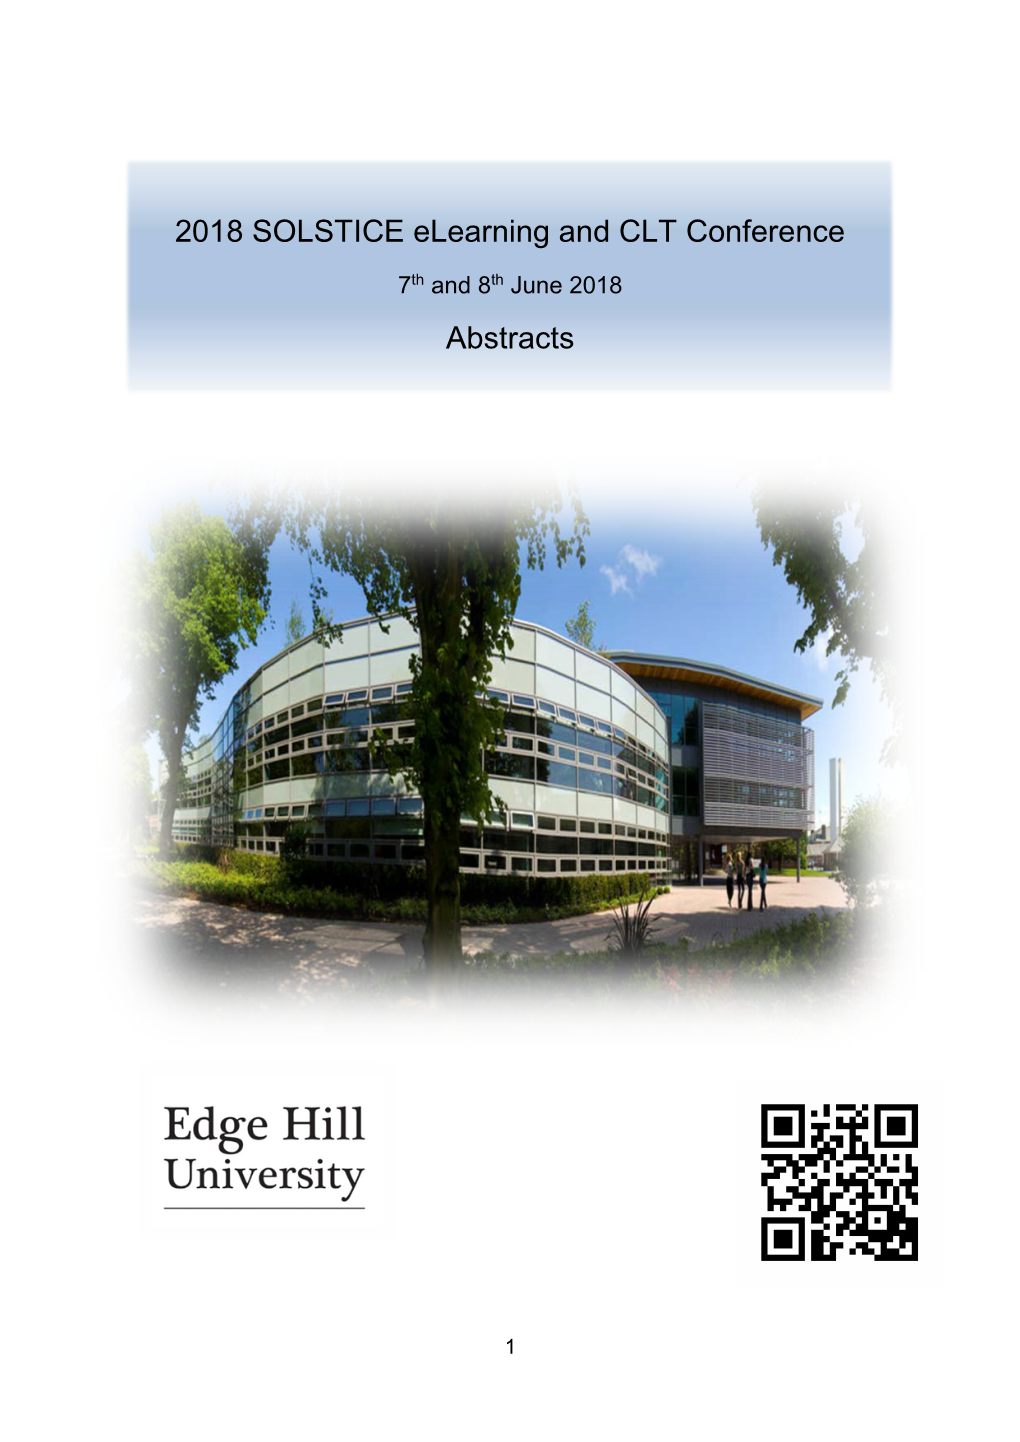 2018 SOLSTICE Elearning and CLT Conference Abstracts